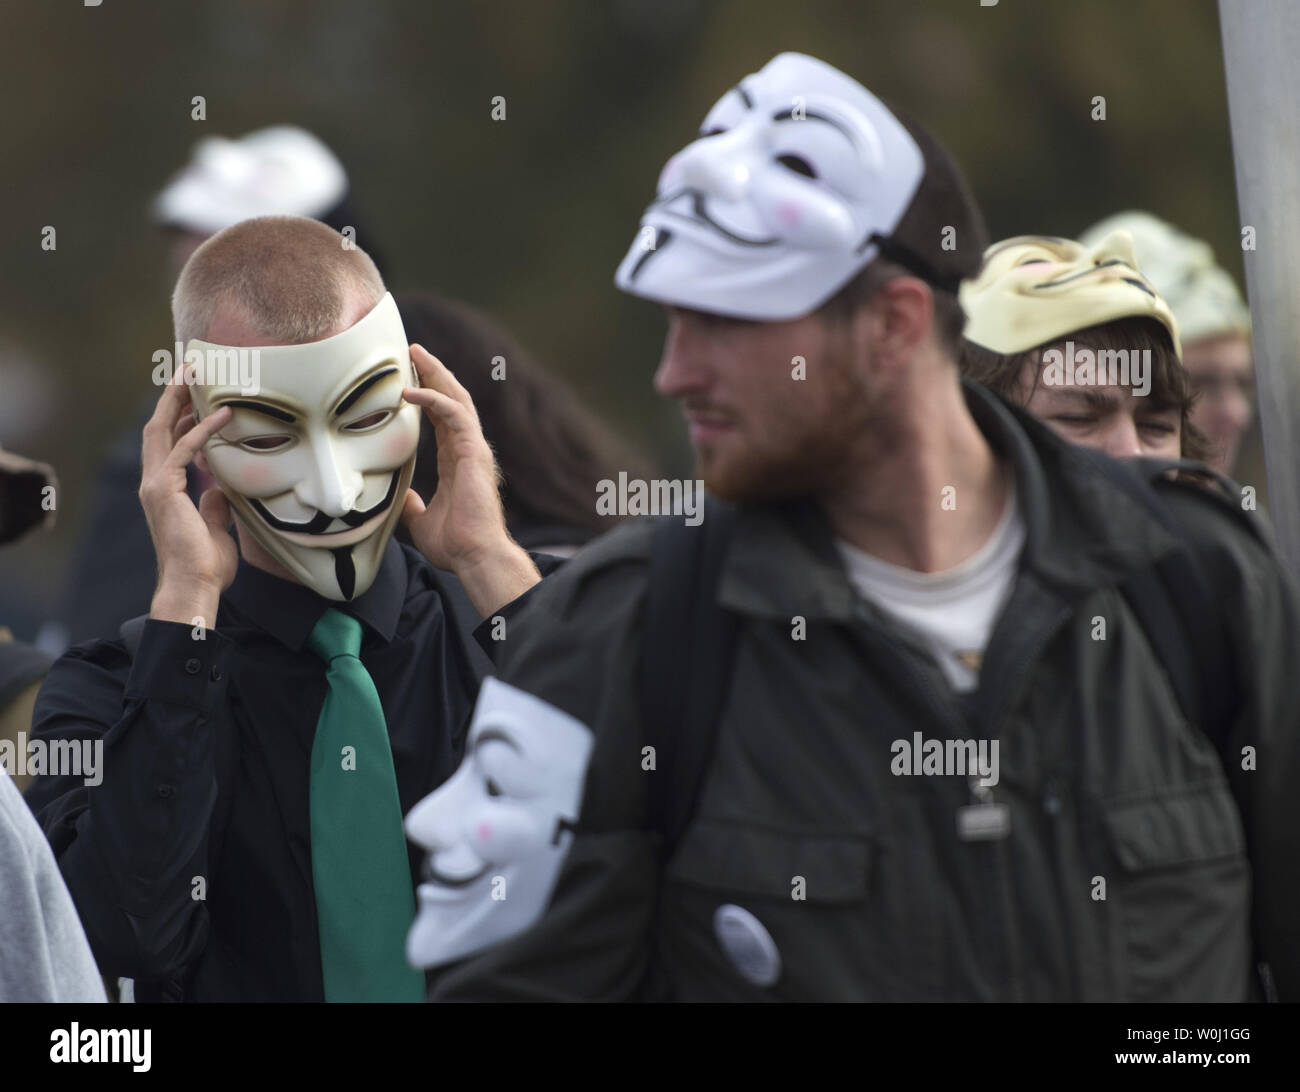 Demonstrators wearing Guy Fawkes masks prepare to march in the Million Mask March, an anti-establishment protest expected to take part today in over 670 cities worldwide, in Washington, D.C. on November 5, 2015. The march, allegedly organized by Anonymous, the “hacktivist” group linked to cyber-attacks against governments and multi-national corporations, aims at protesting government overreach and corporate greed, among other grievances. Photo by Kevin Dietsch/UPI Stock Photo